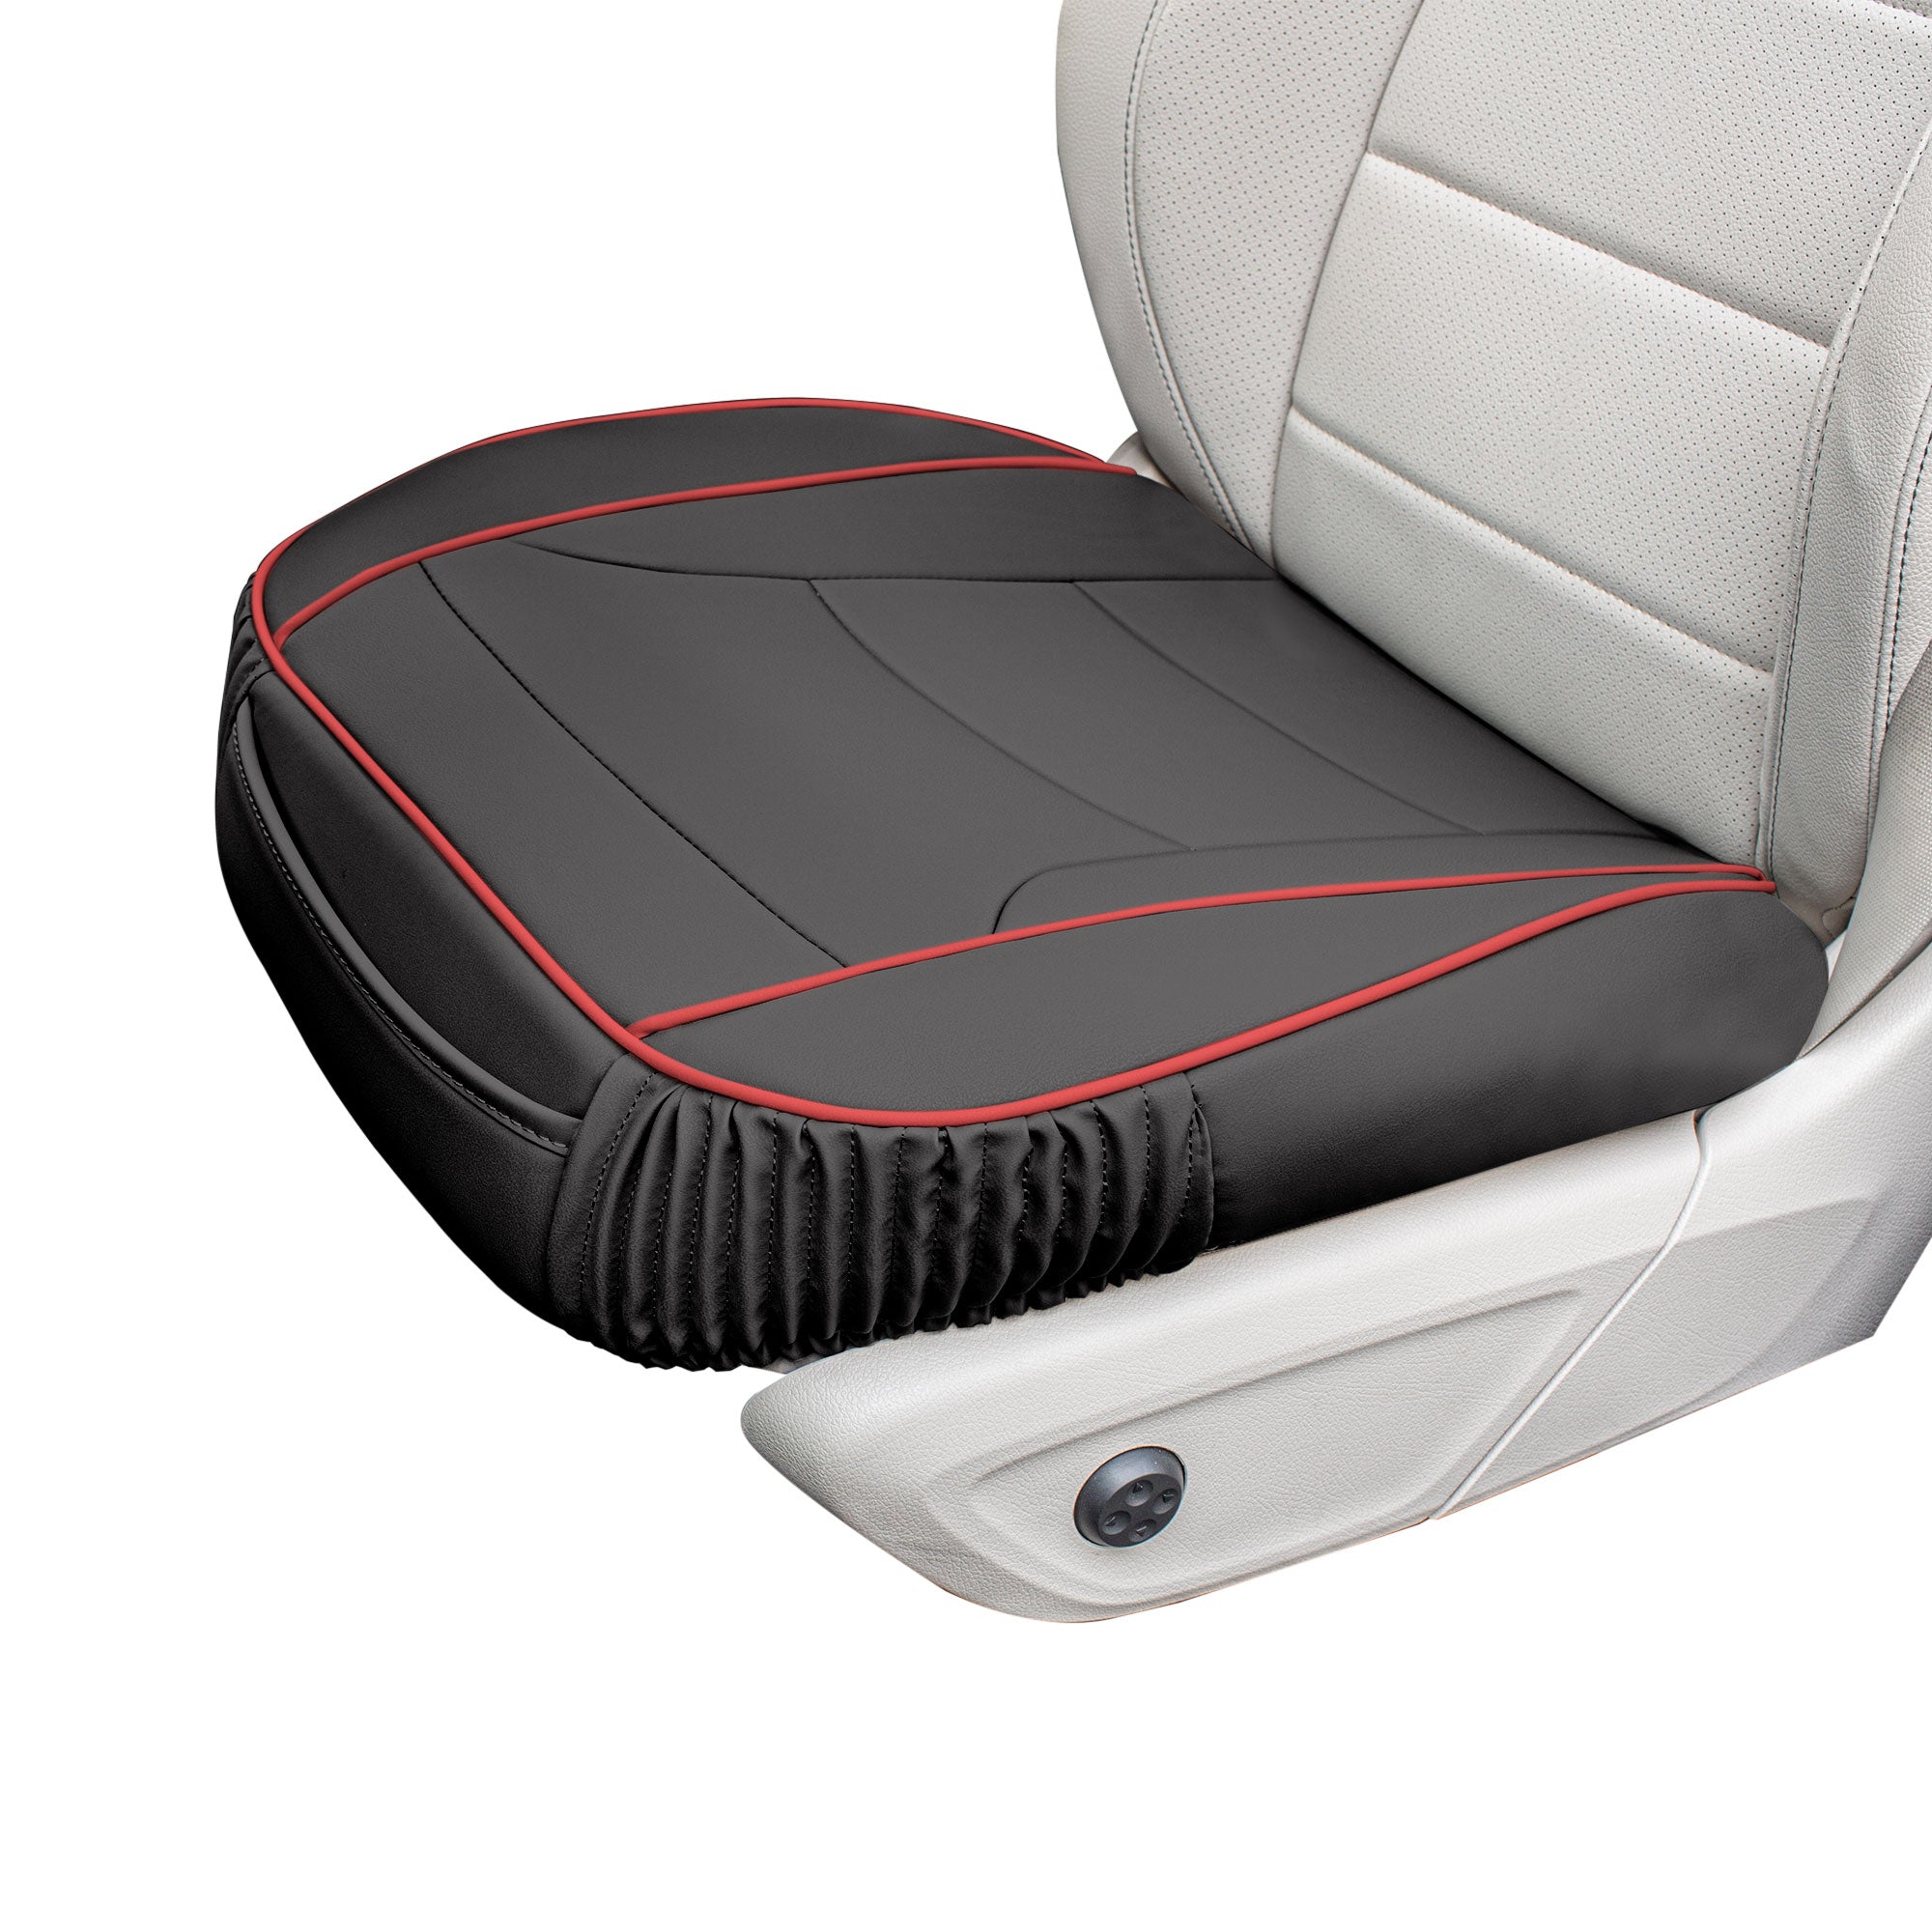 Copy of Faux Leather Seat Cushion Pad - 2 Piece Front Set Black/Red Trim